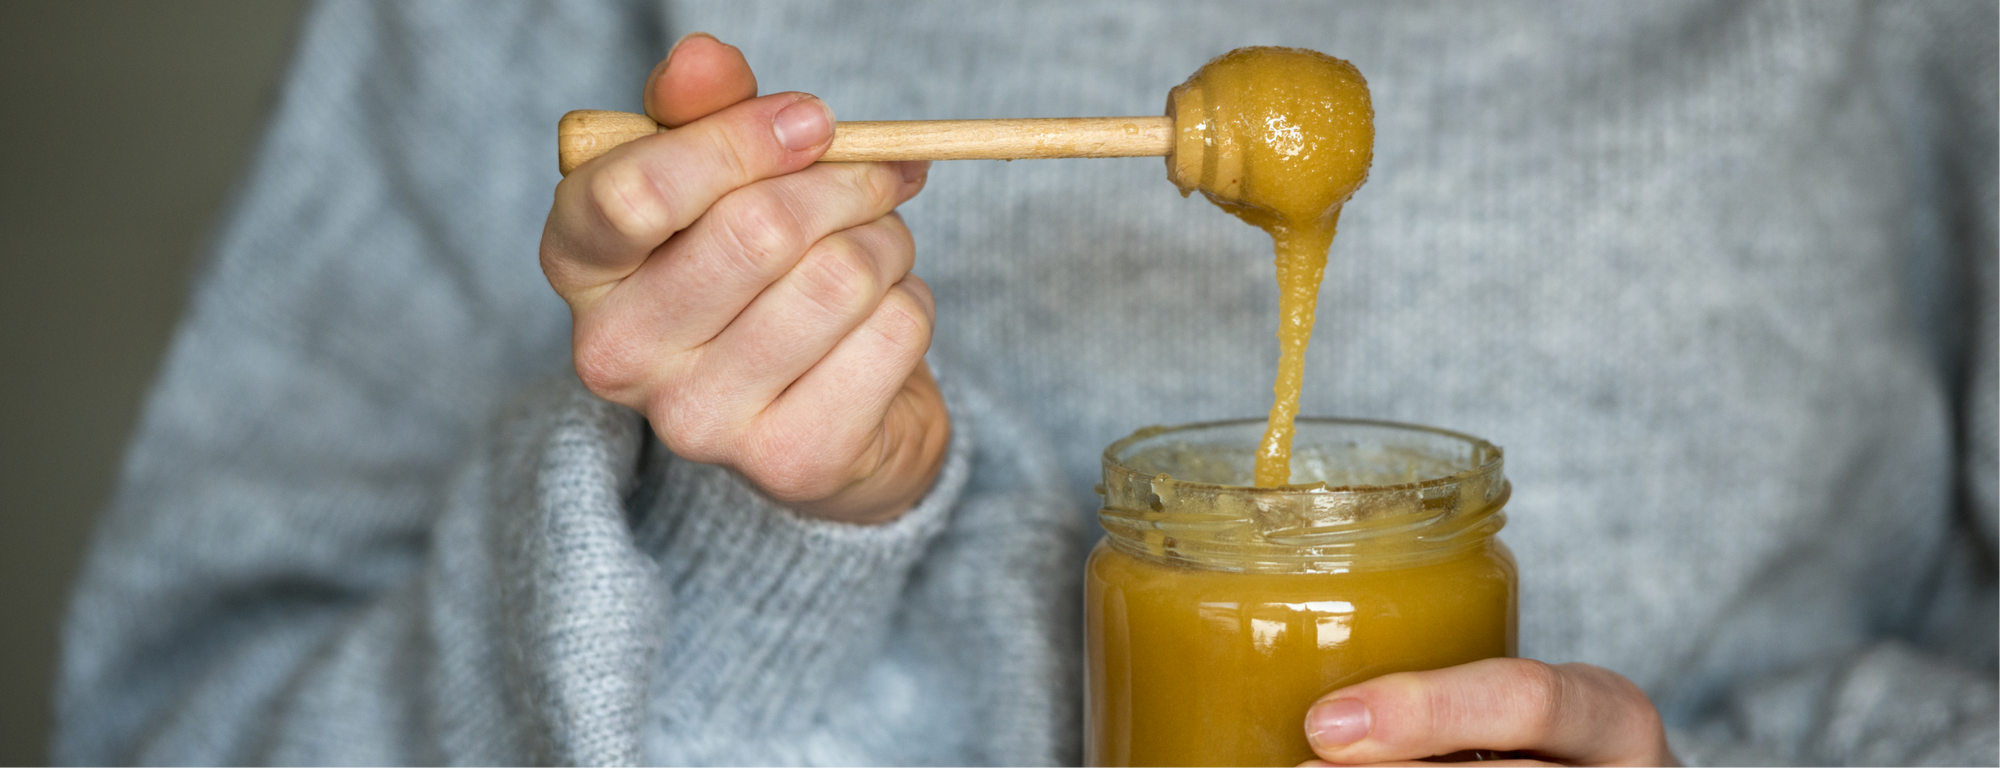 Woman scooping Manuka honey out of a jar